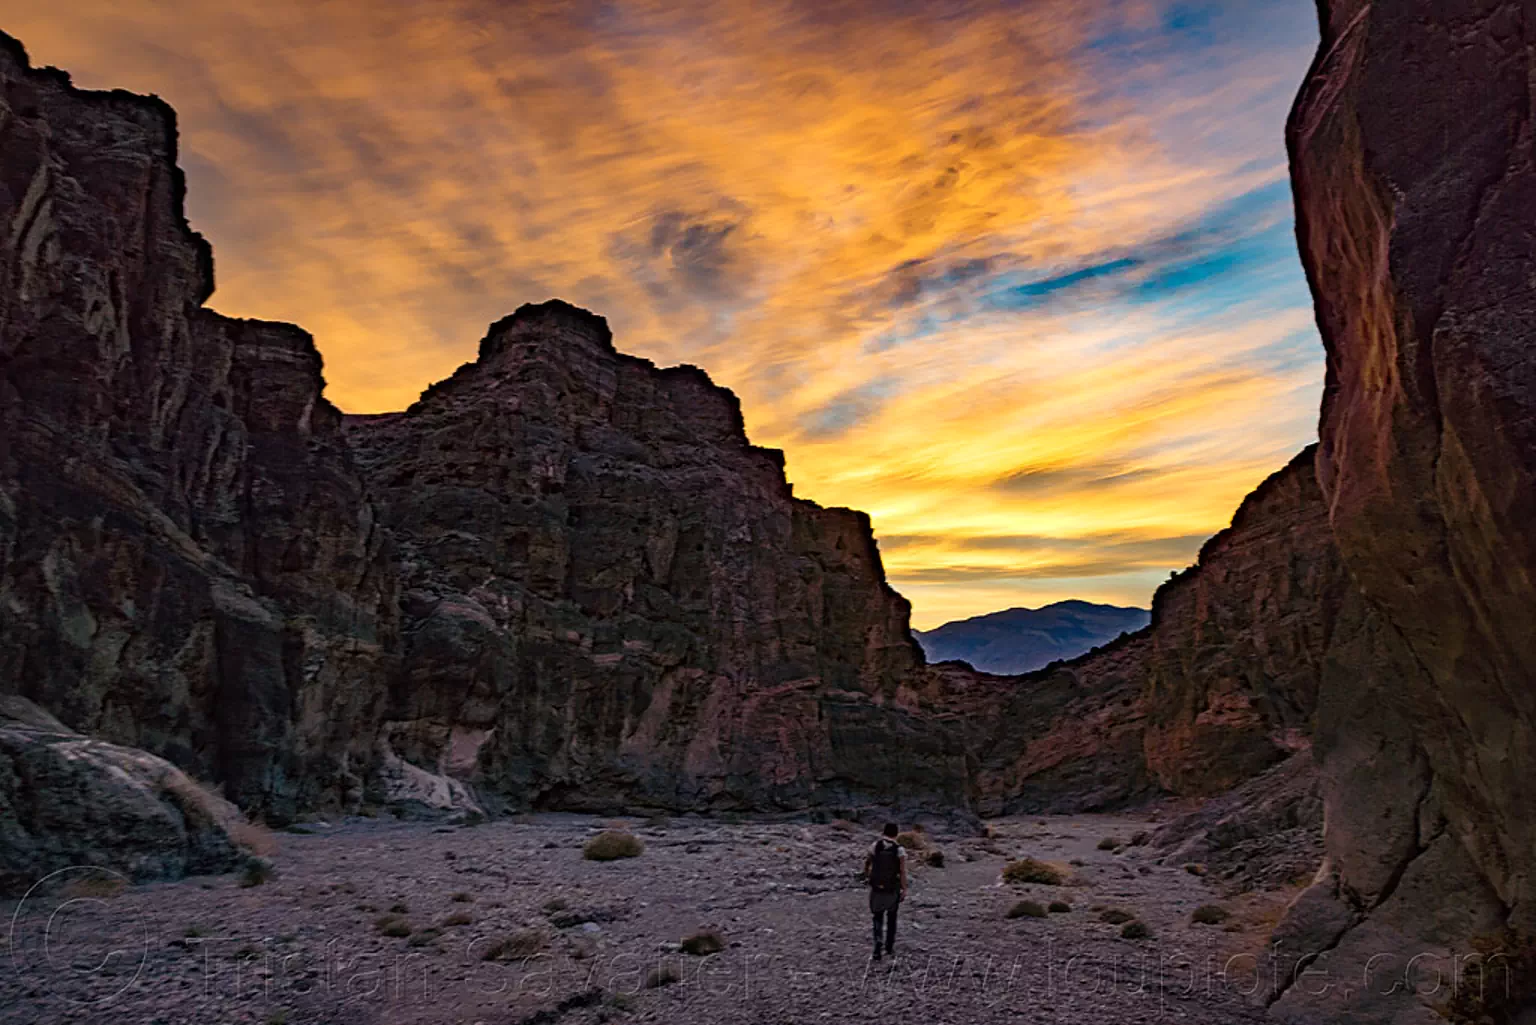 sunset - fall canyon - death valley national park (california), death valley, fall canyon, hiking